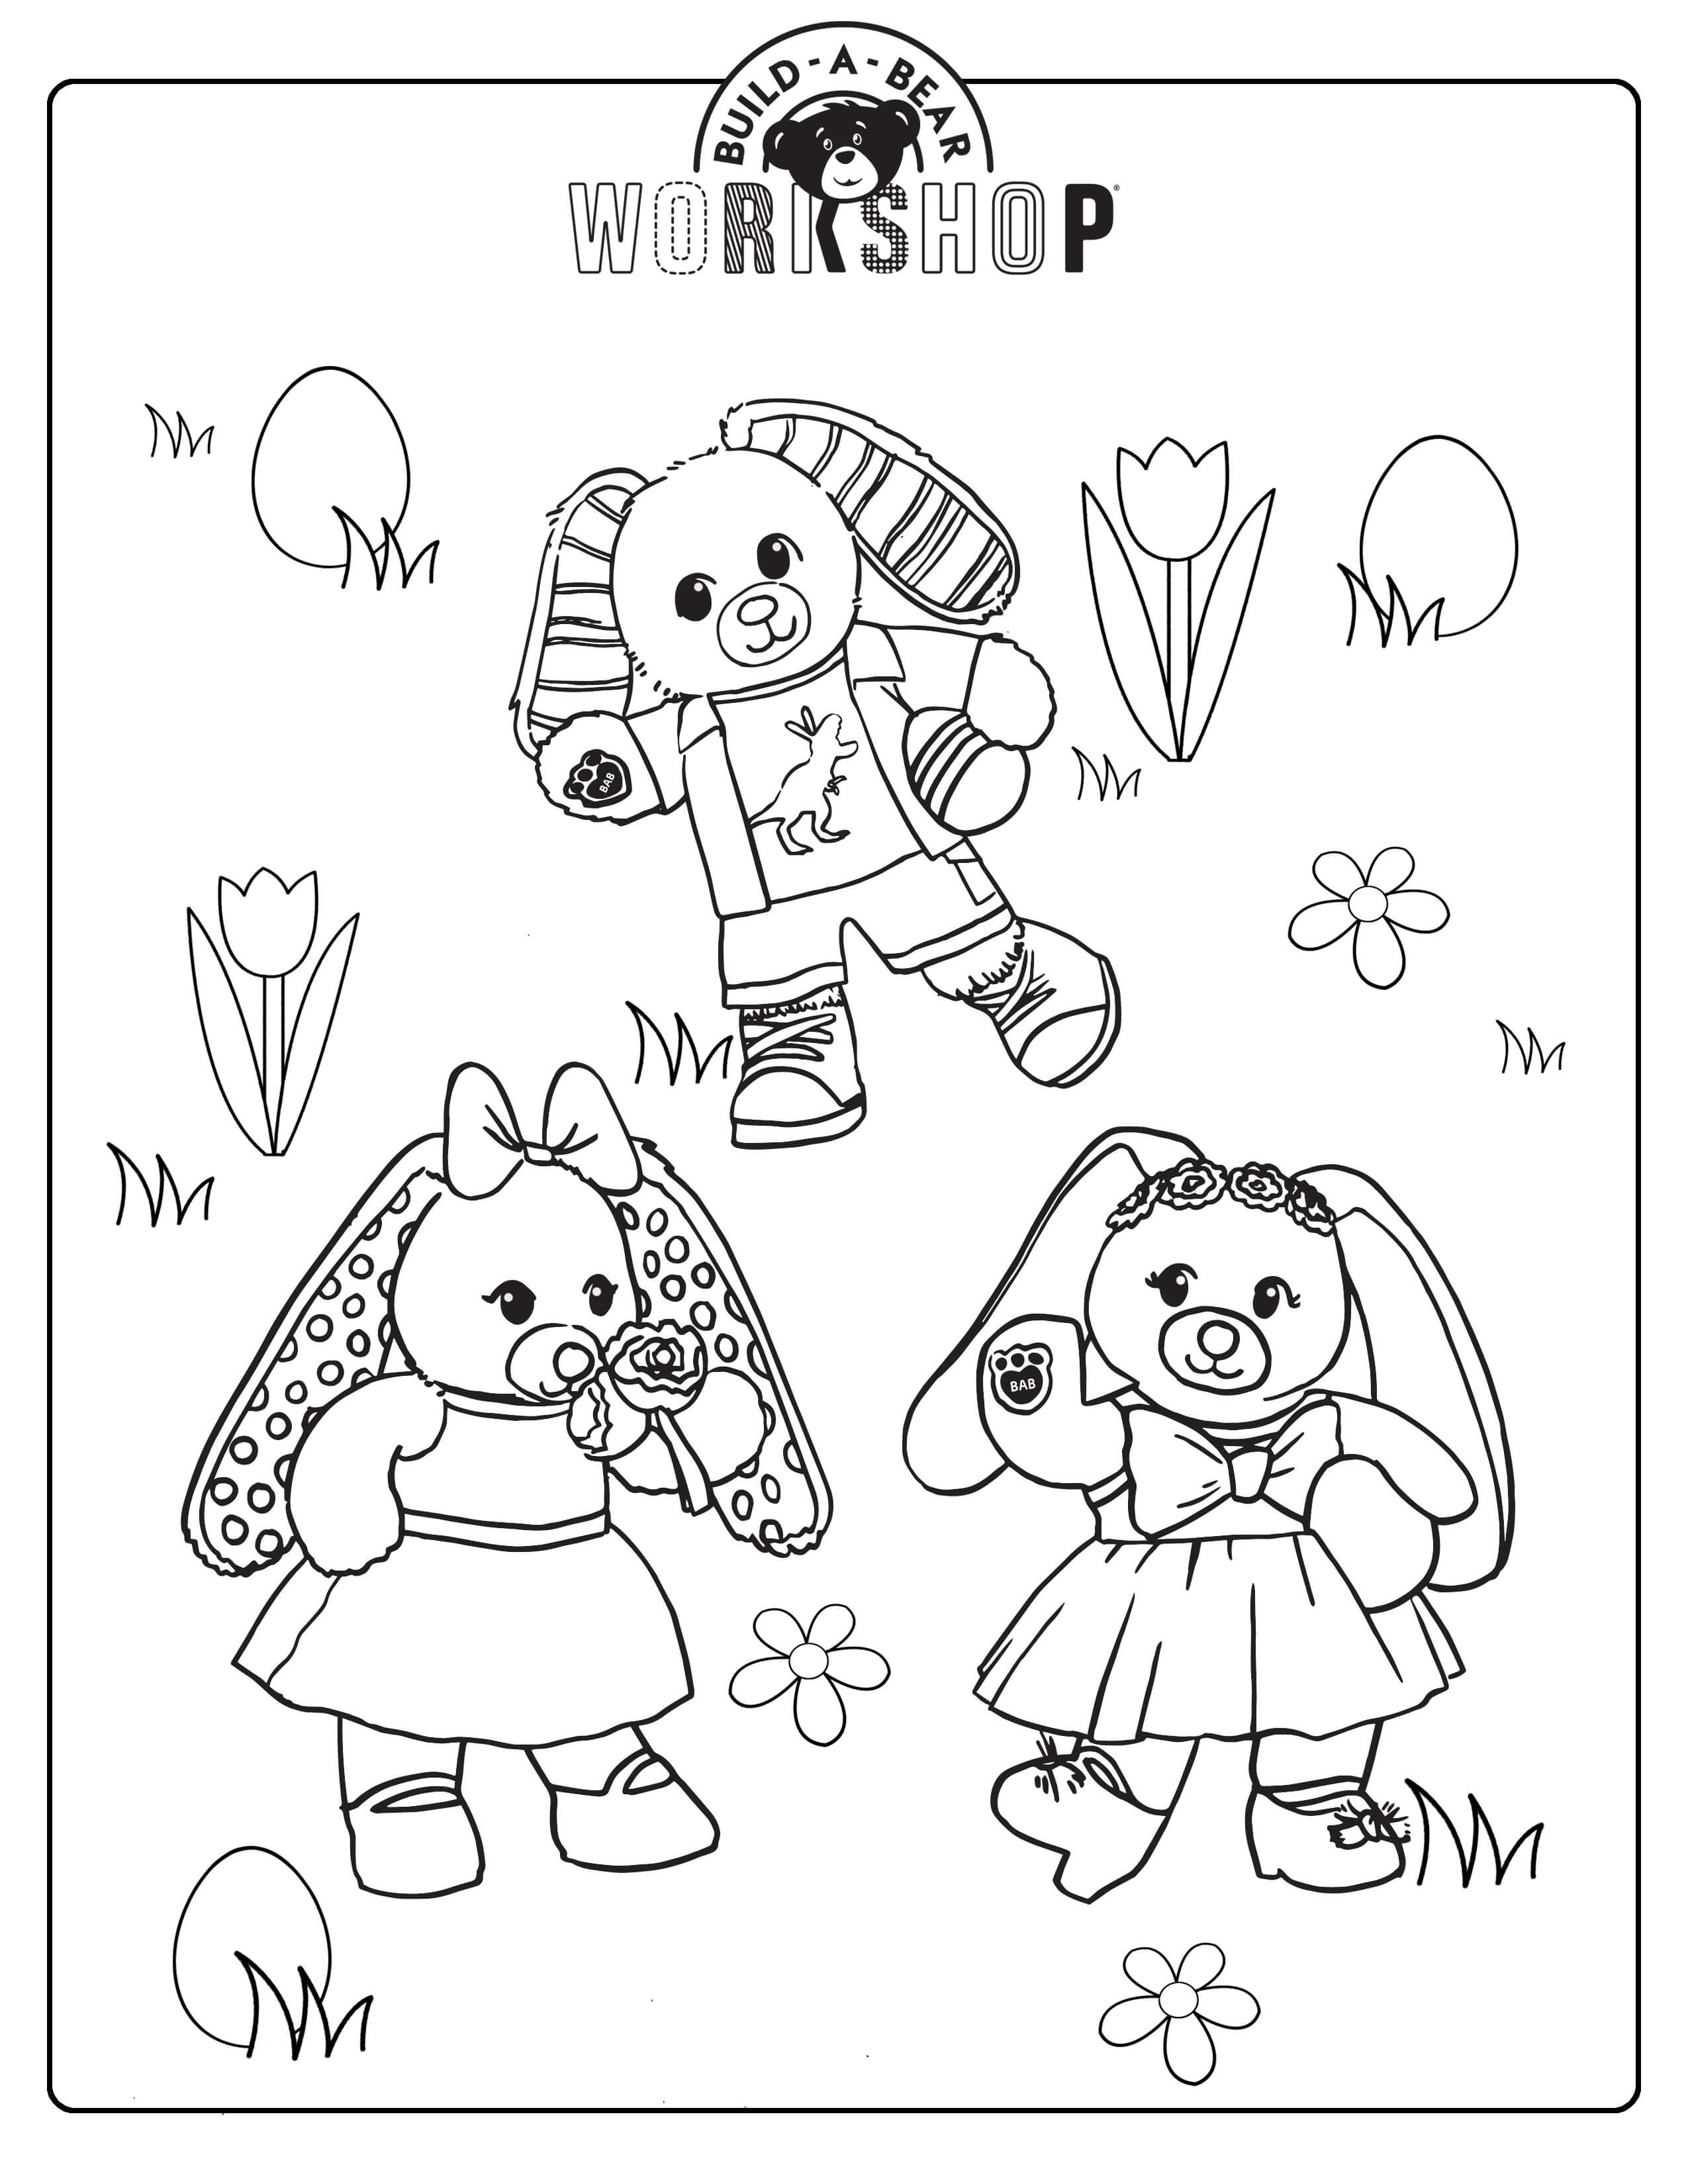 Purple Eating Ice Cream Rainbow Friends Roblox Coloring Page for Kids -  Free Roblox Printable Coloring Pages Online for Kids 